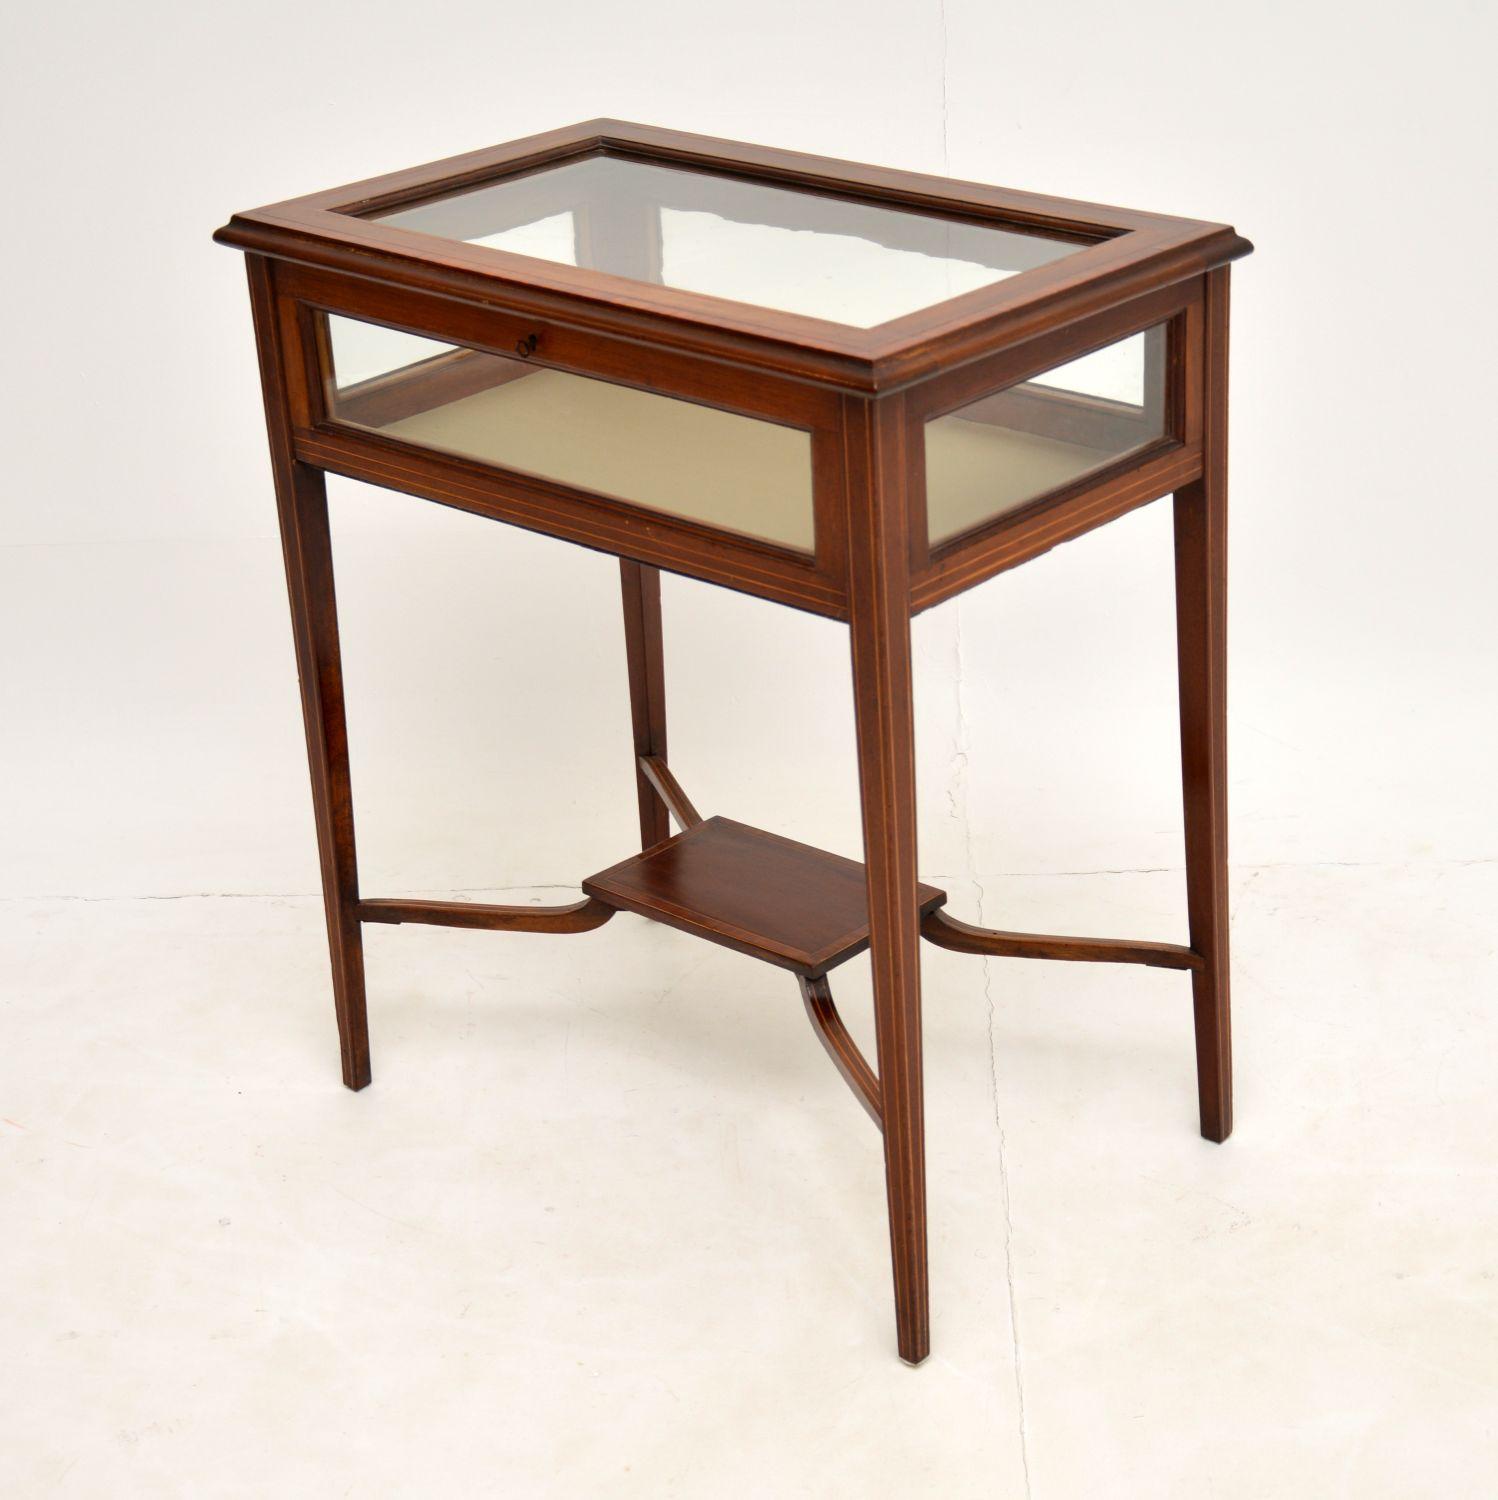 Early 20th Century Antique Edwardian Inlaid Mahogany Bijouterie Display Table